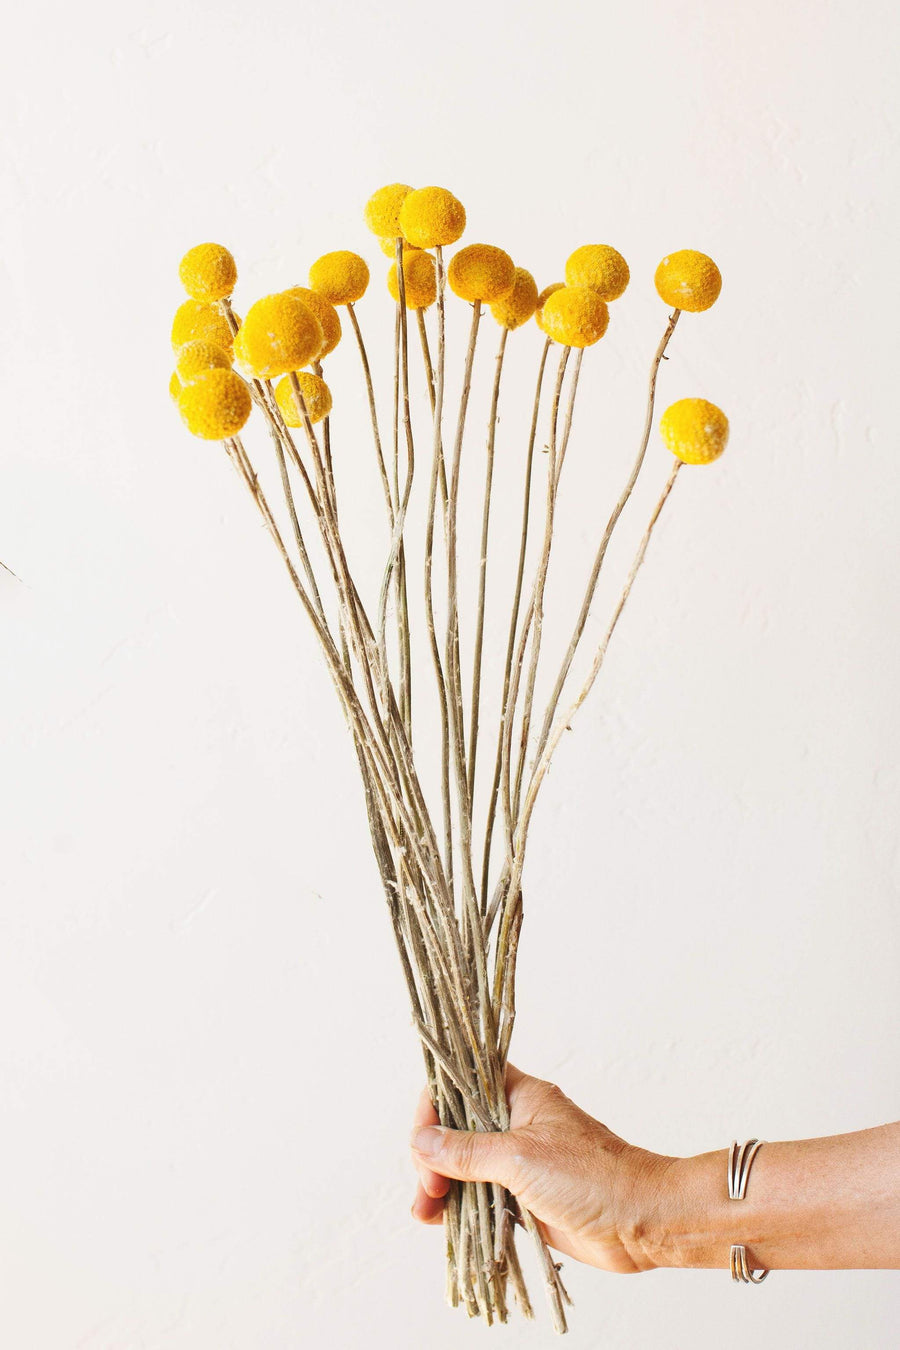 Idlewild Floral Co. Dried Yellow Billy Balls